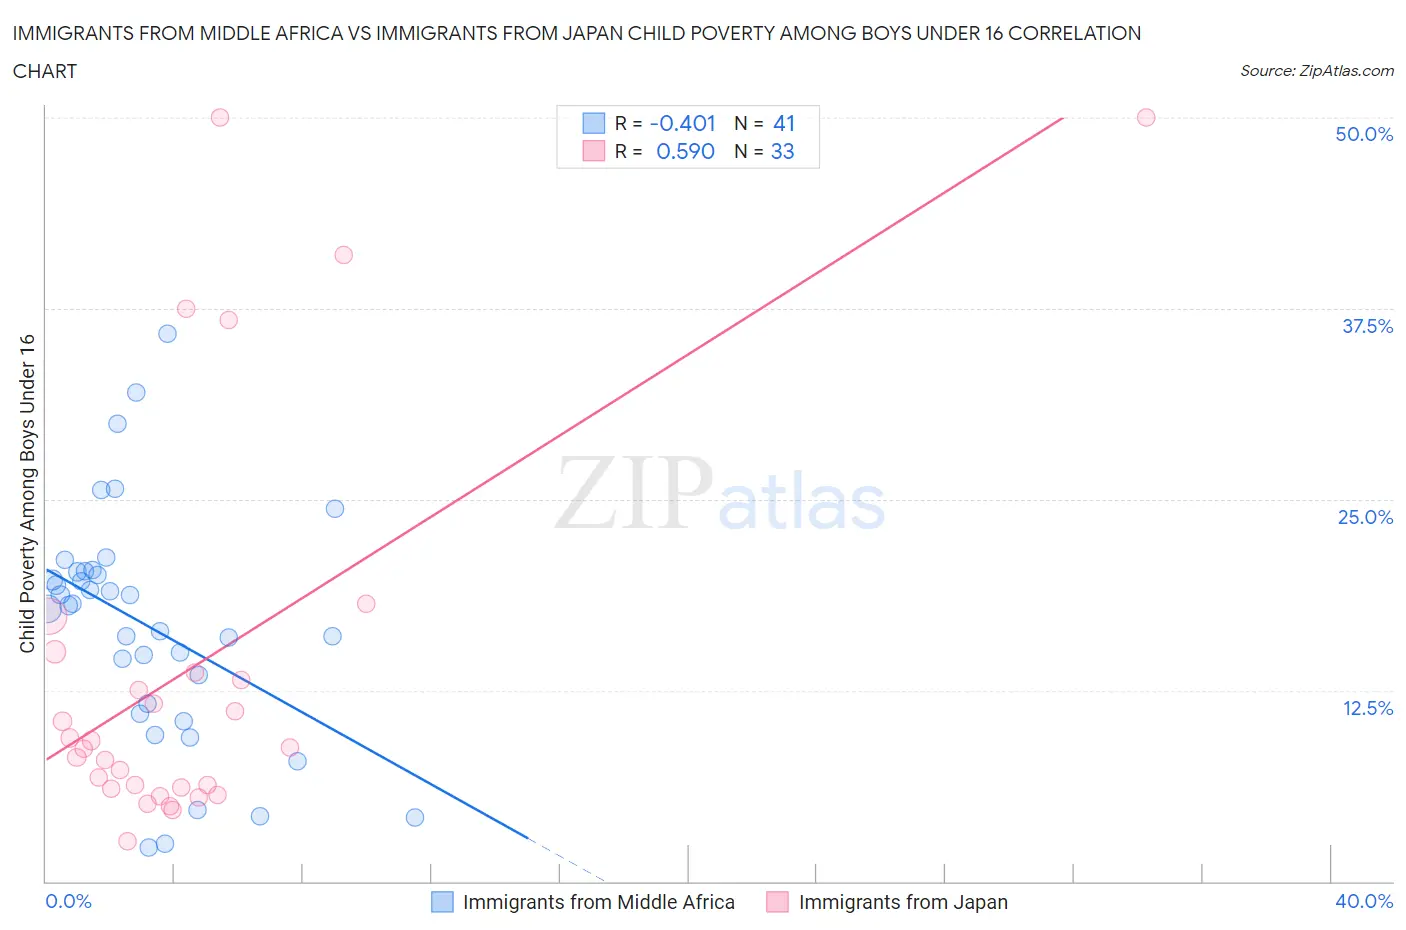 Immigrants from Middle Africa vs Immigrants from Japan Child Poverty Among Boys Under 16